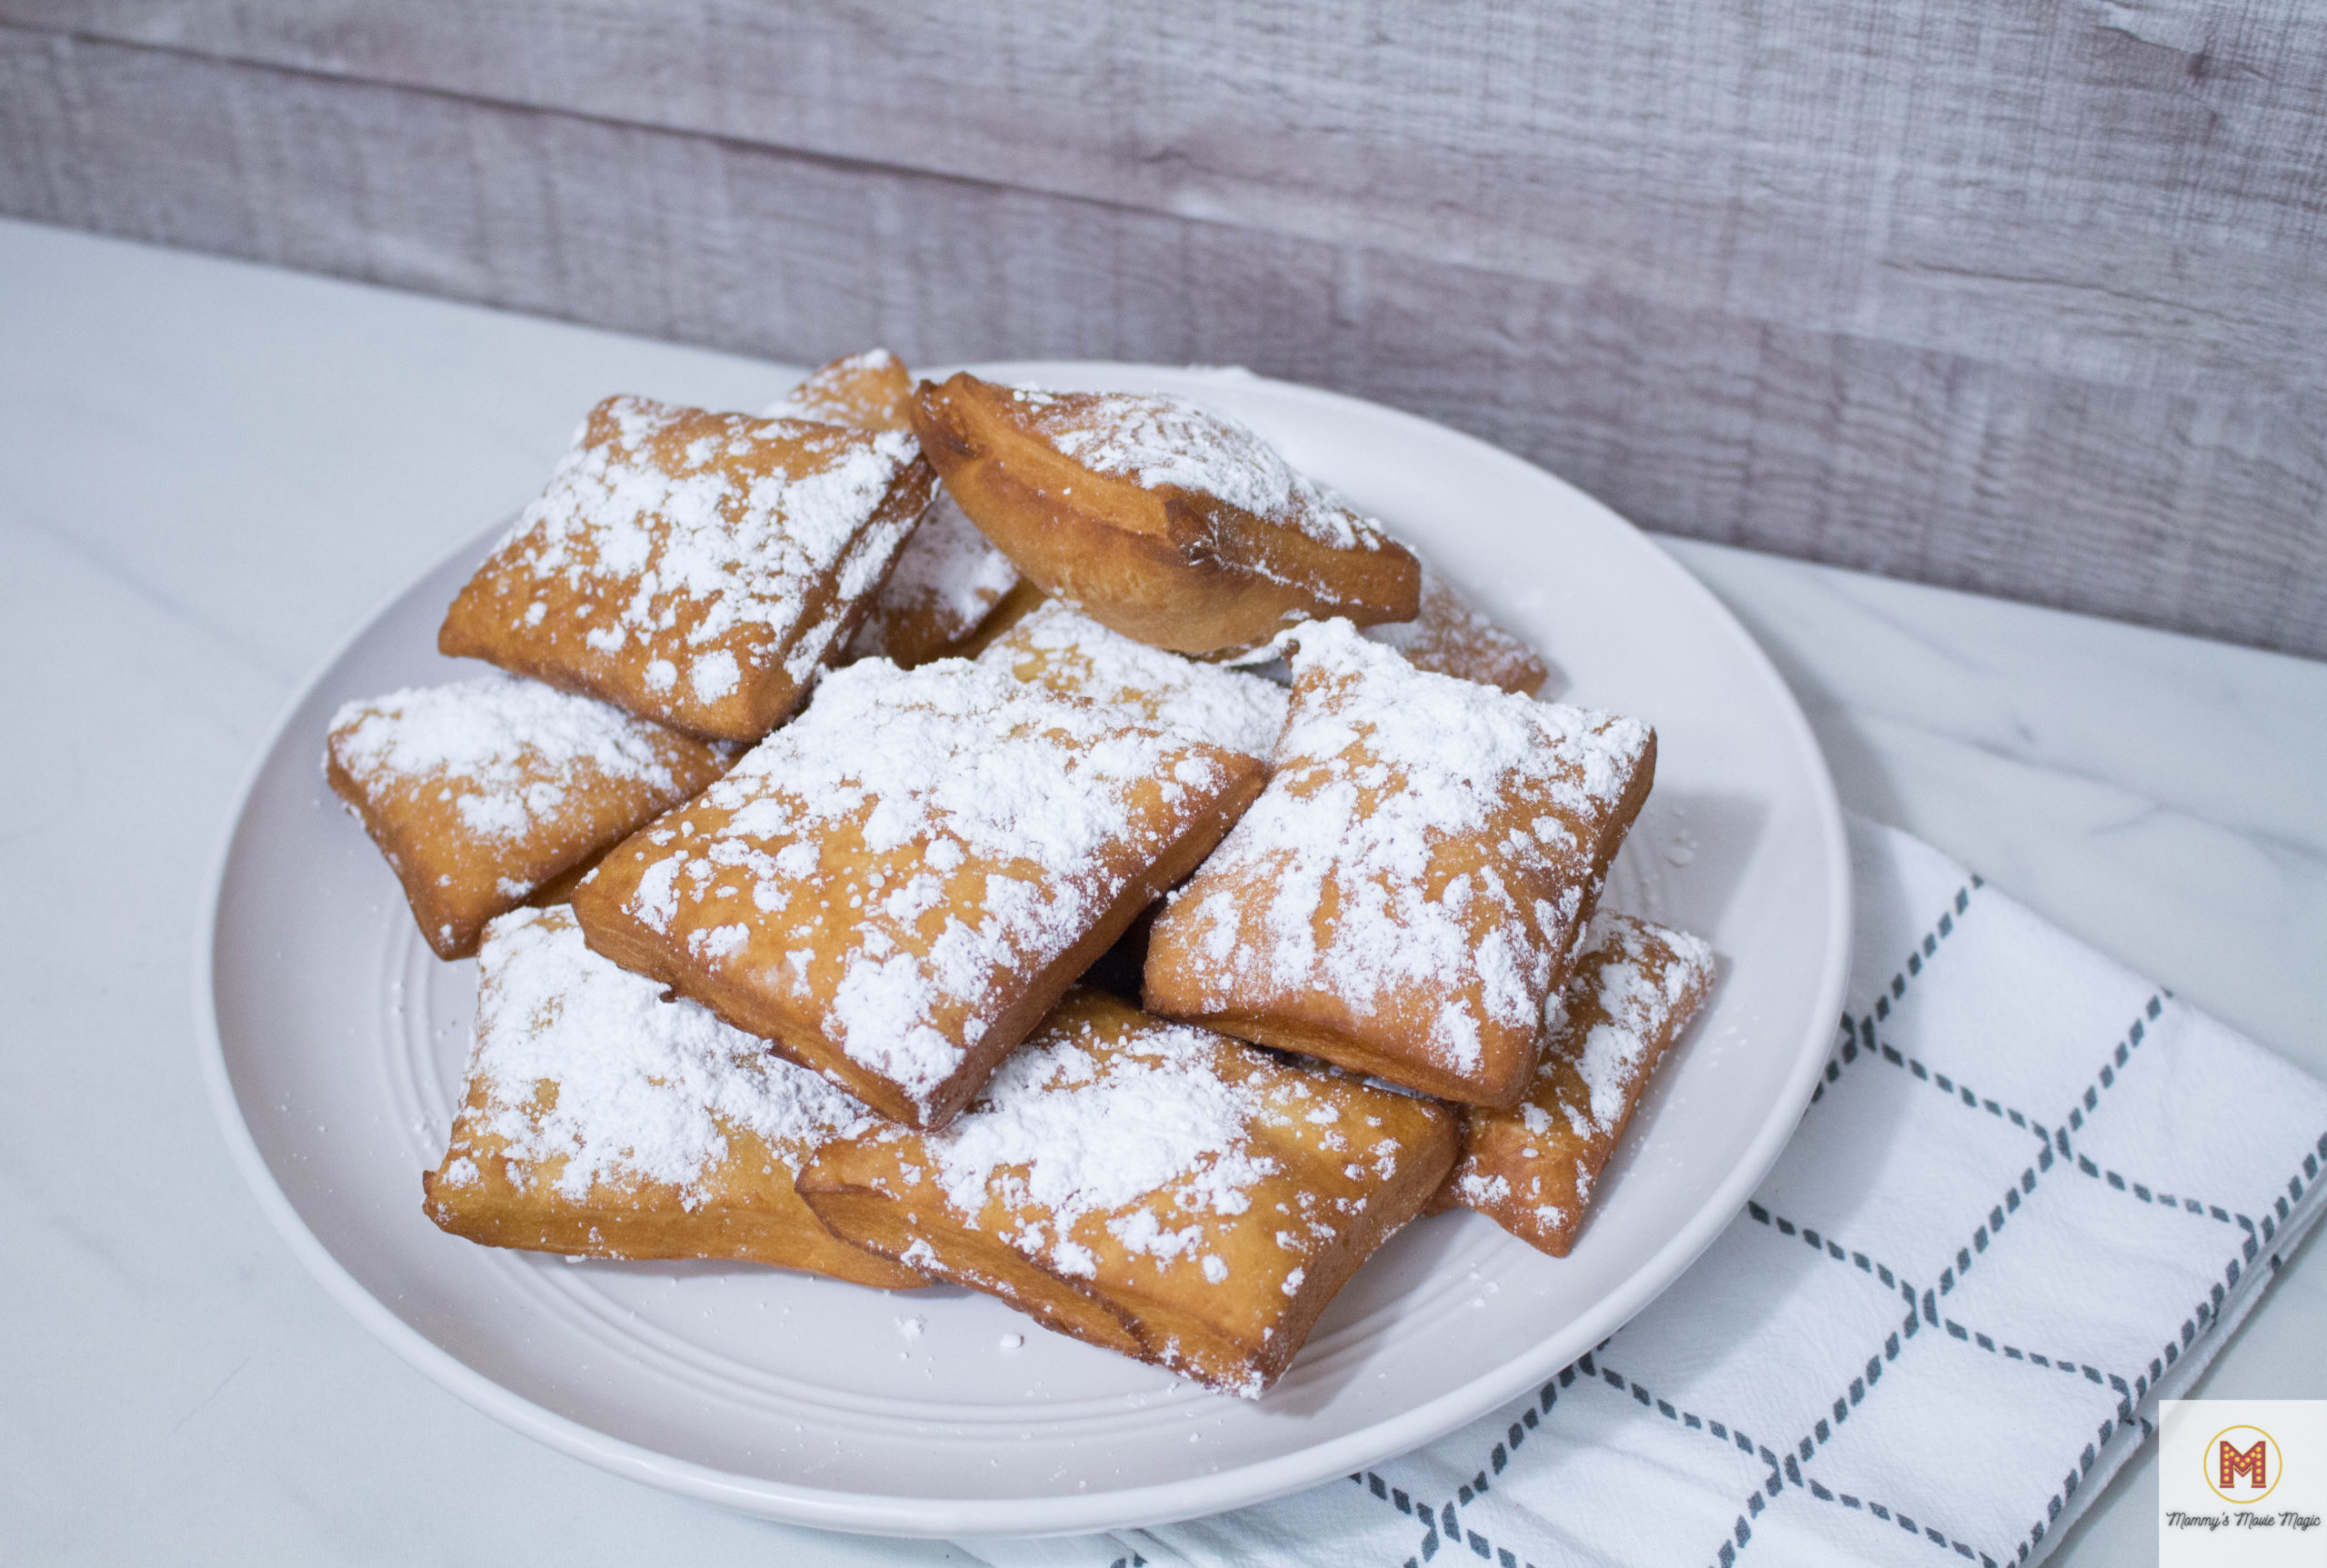 Princess and the Frog party food for Princess and the Frog movie night - Tiana's Beignet Recipe